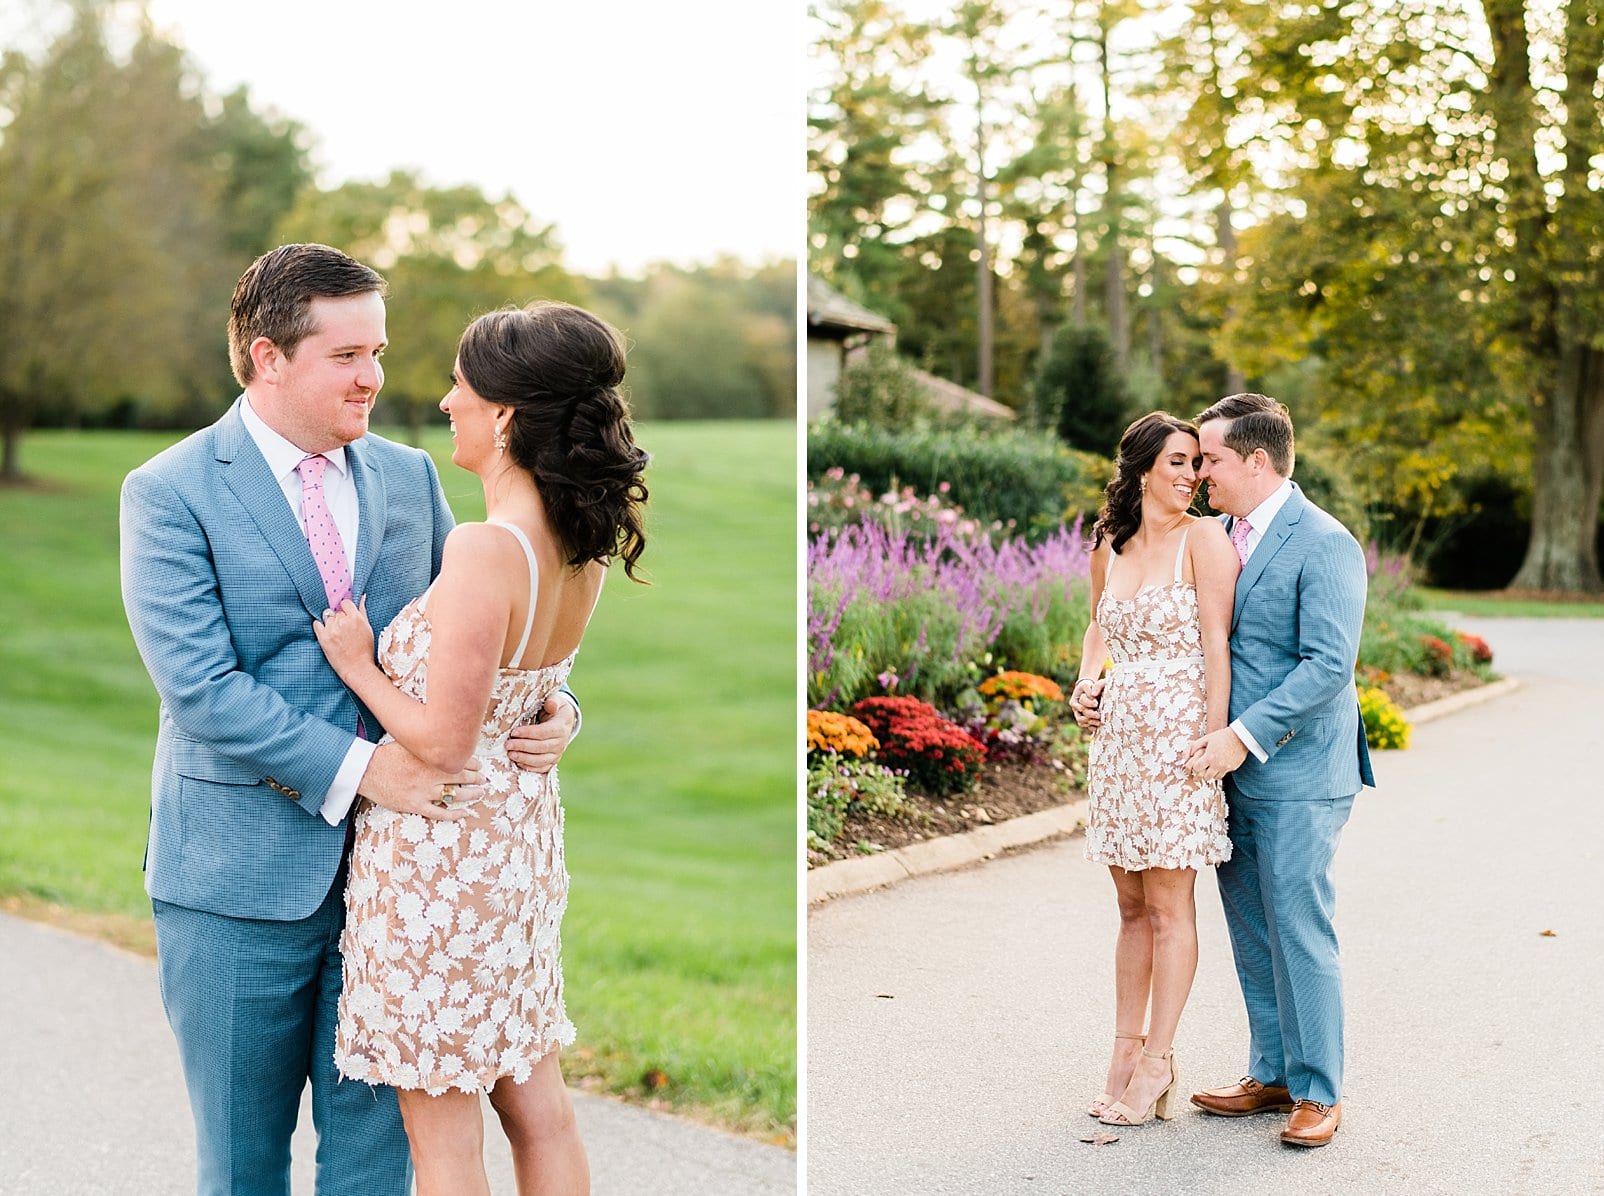 Biltmore Estate bride and groom portraits before rehearsal dinner photo